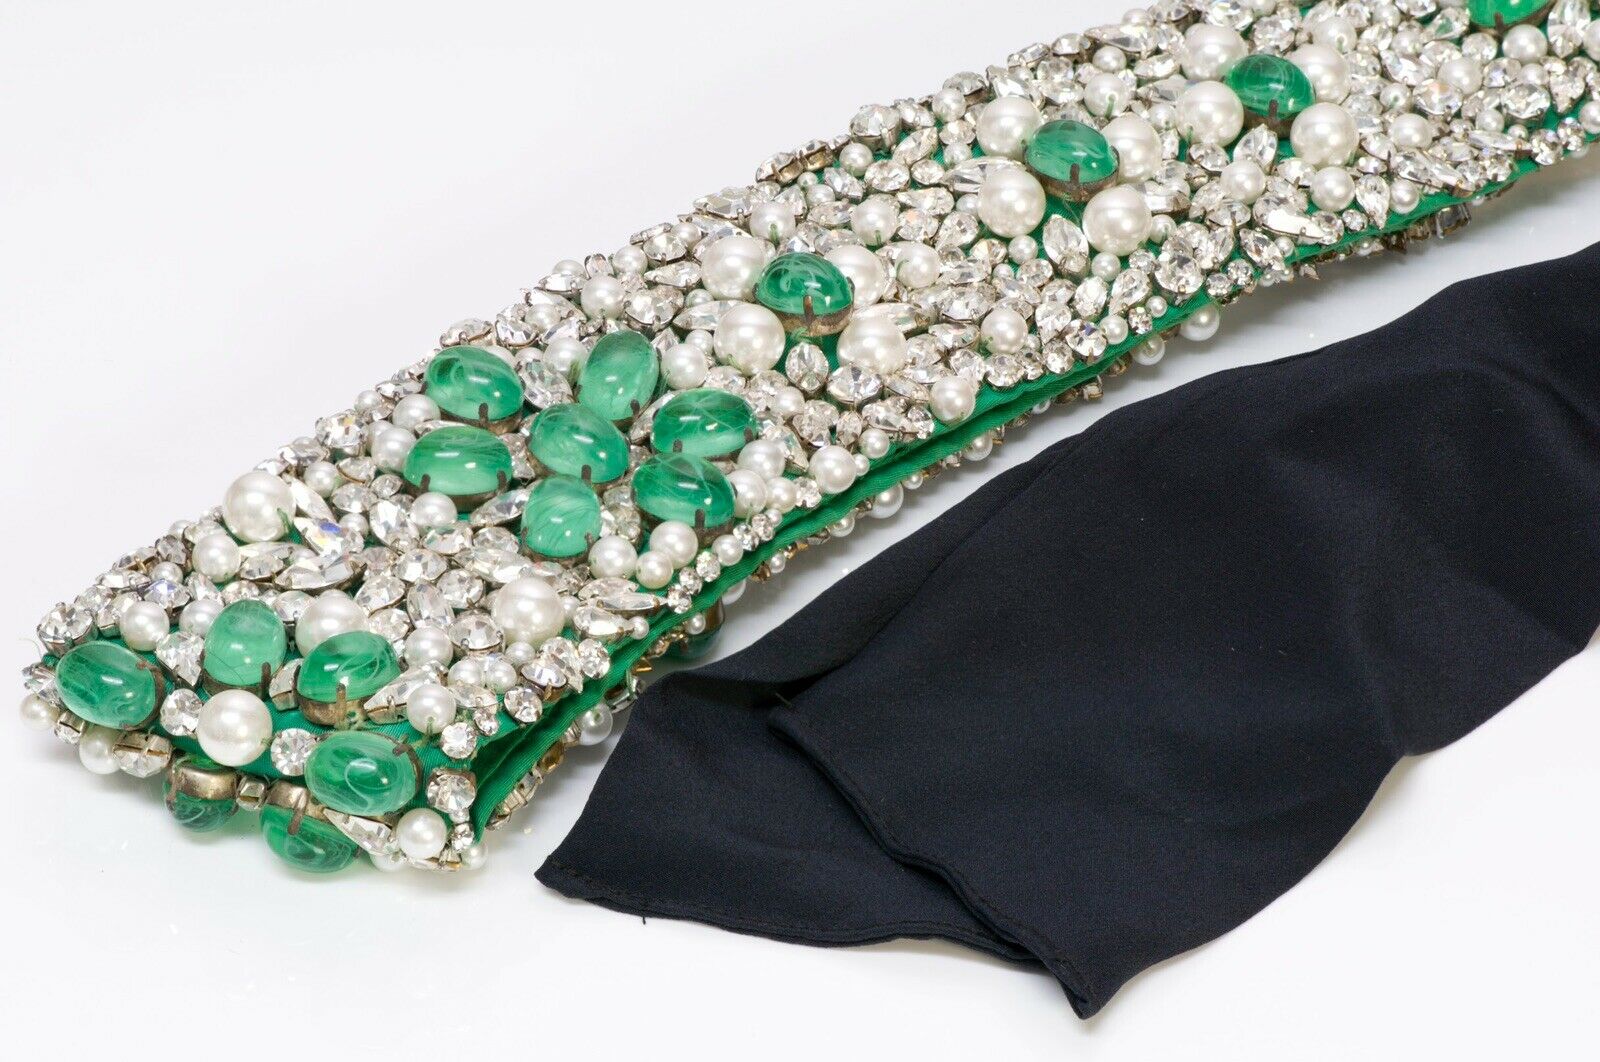 Vintage Maison GRIPOIX Wide Beaded Green Cabochon Glass Pearl Crystal Satin Belt